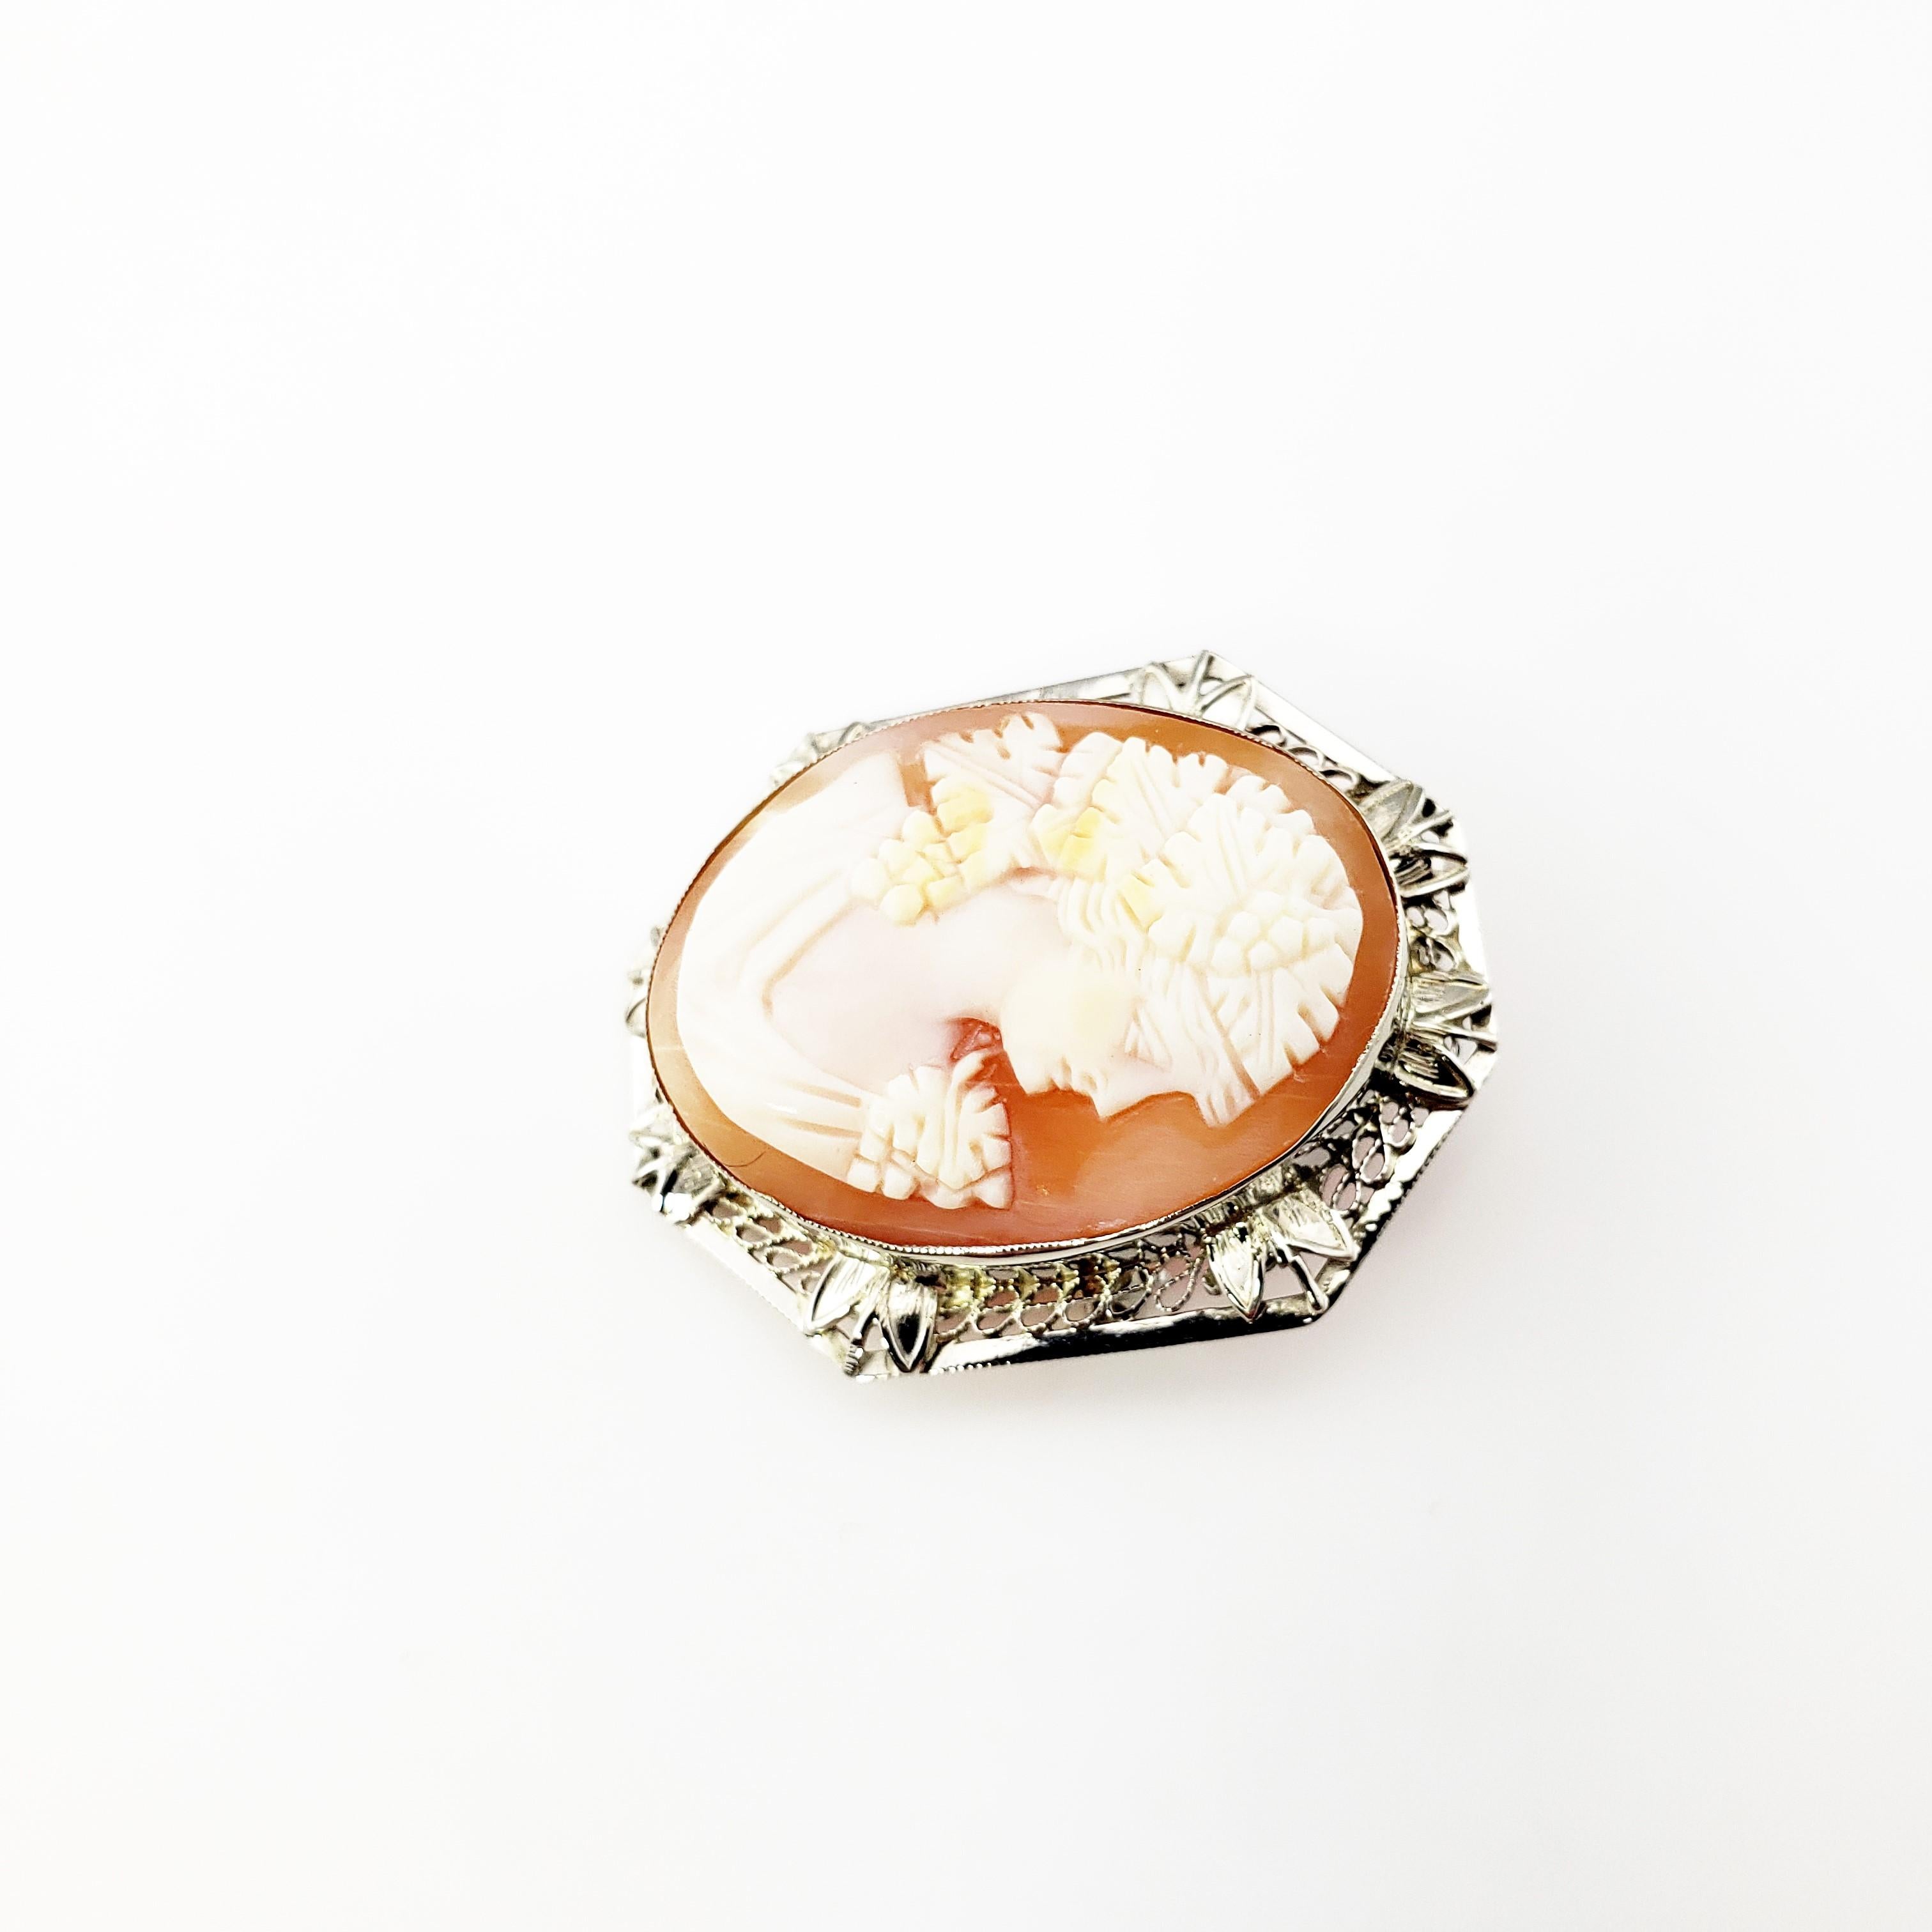 Vintage 14 Karat White Gold Cameo Brooch / Pendant

This elegant cameo features a lovely lady in profile set in beautifully detailed 14K white gold filigree. Can be worn as a brooch or a pendant.

Size: 30 mm x 24 mm

Weight: 3.7 dwt. / 5.9